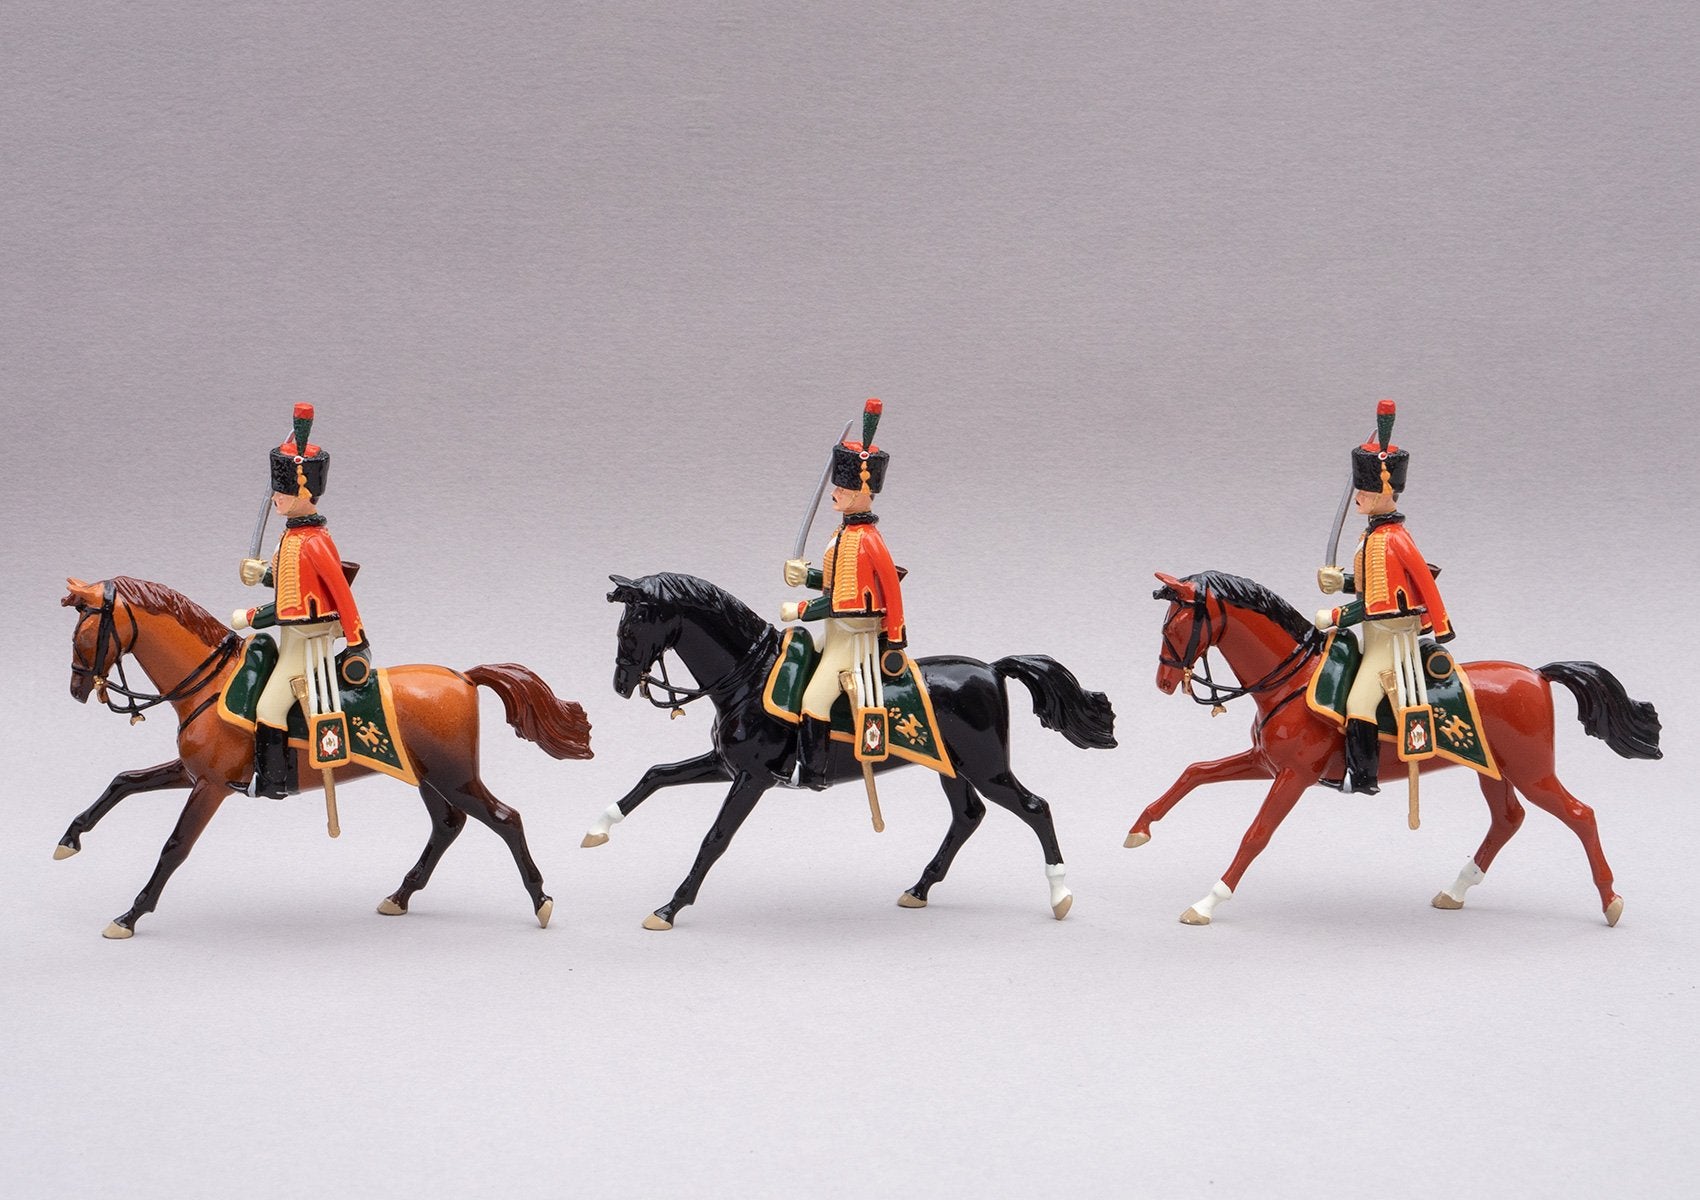 Set 95 Chasseurs à Cheval | French Cavalry | Napoleonic Wars | Three mounted figures with carbines and sabres | Waterloo | © Imperial Productions | Sculpt by David Cowe